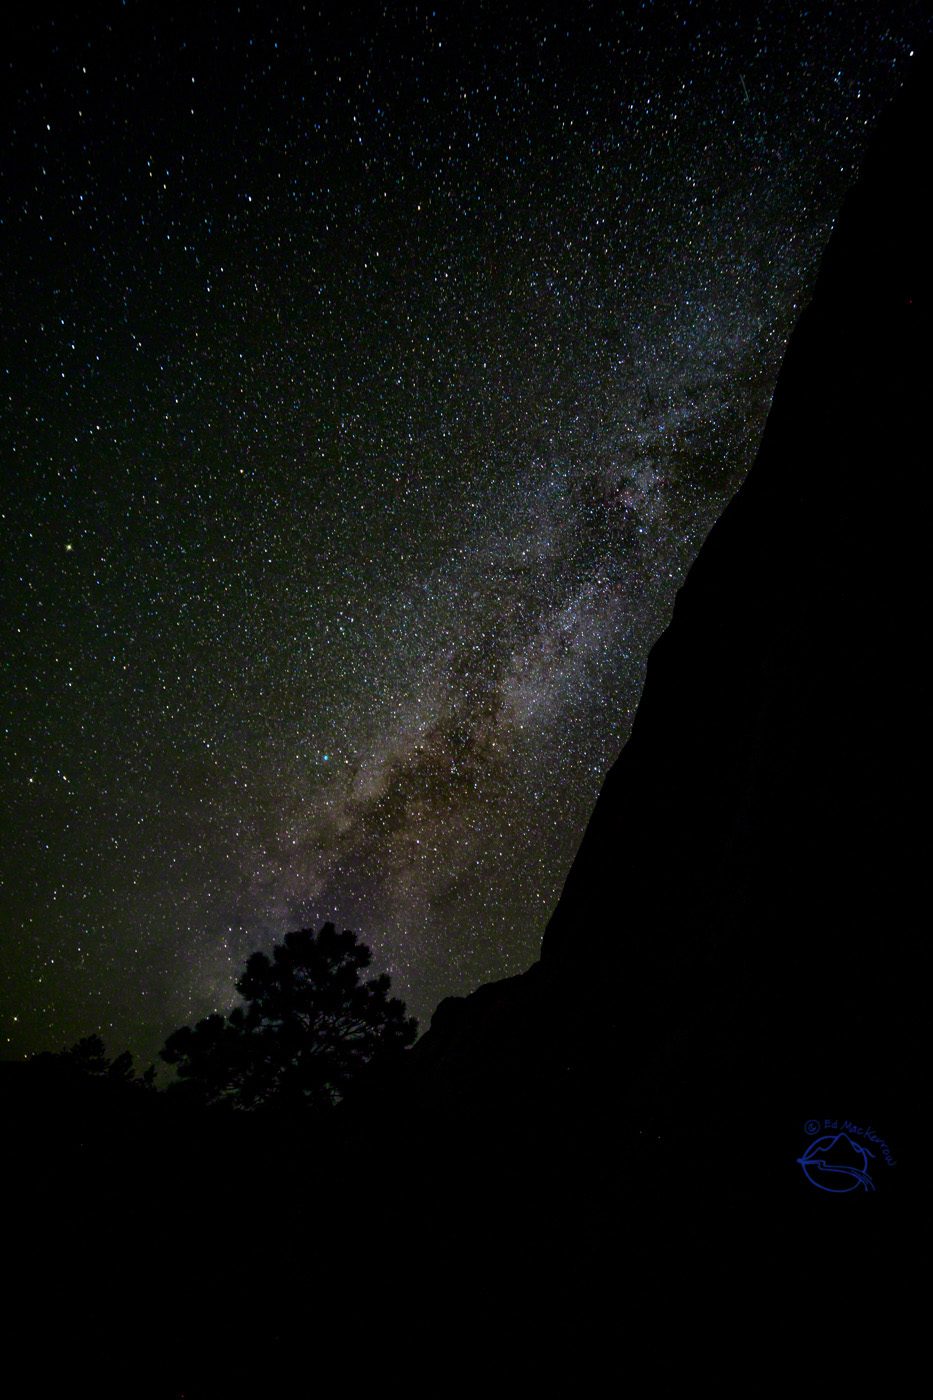 The Milky Way lights up the night sky in the Tusas Mountains of New Mexico